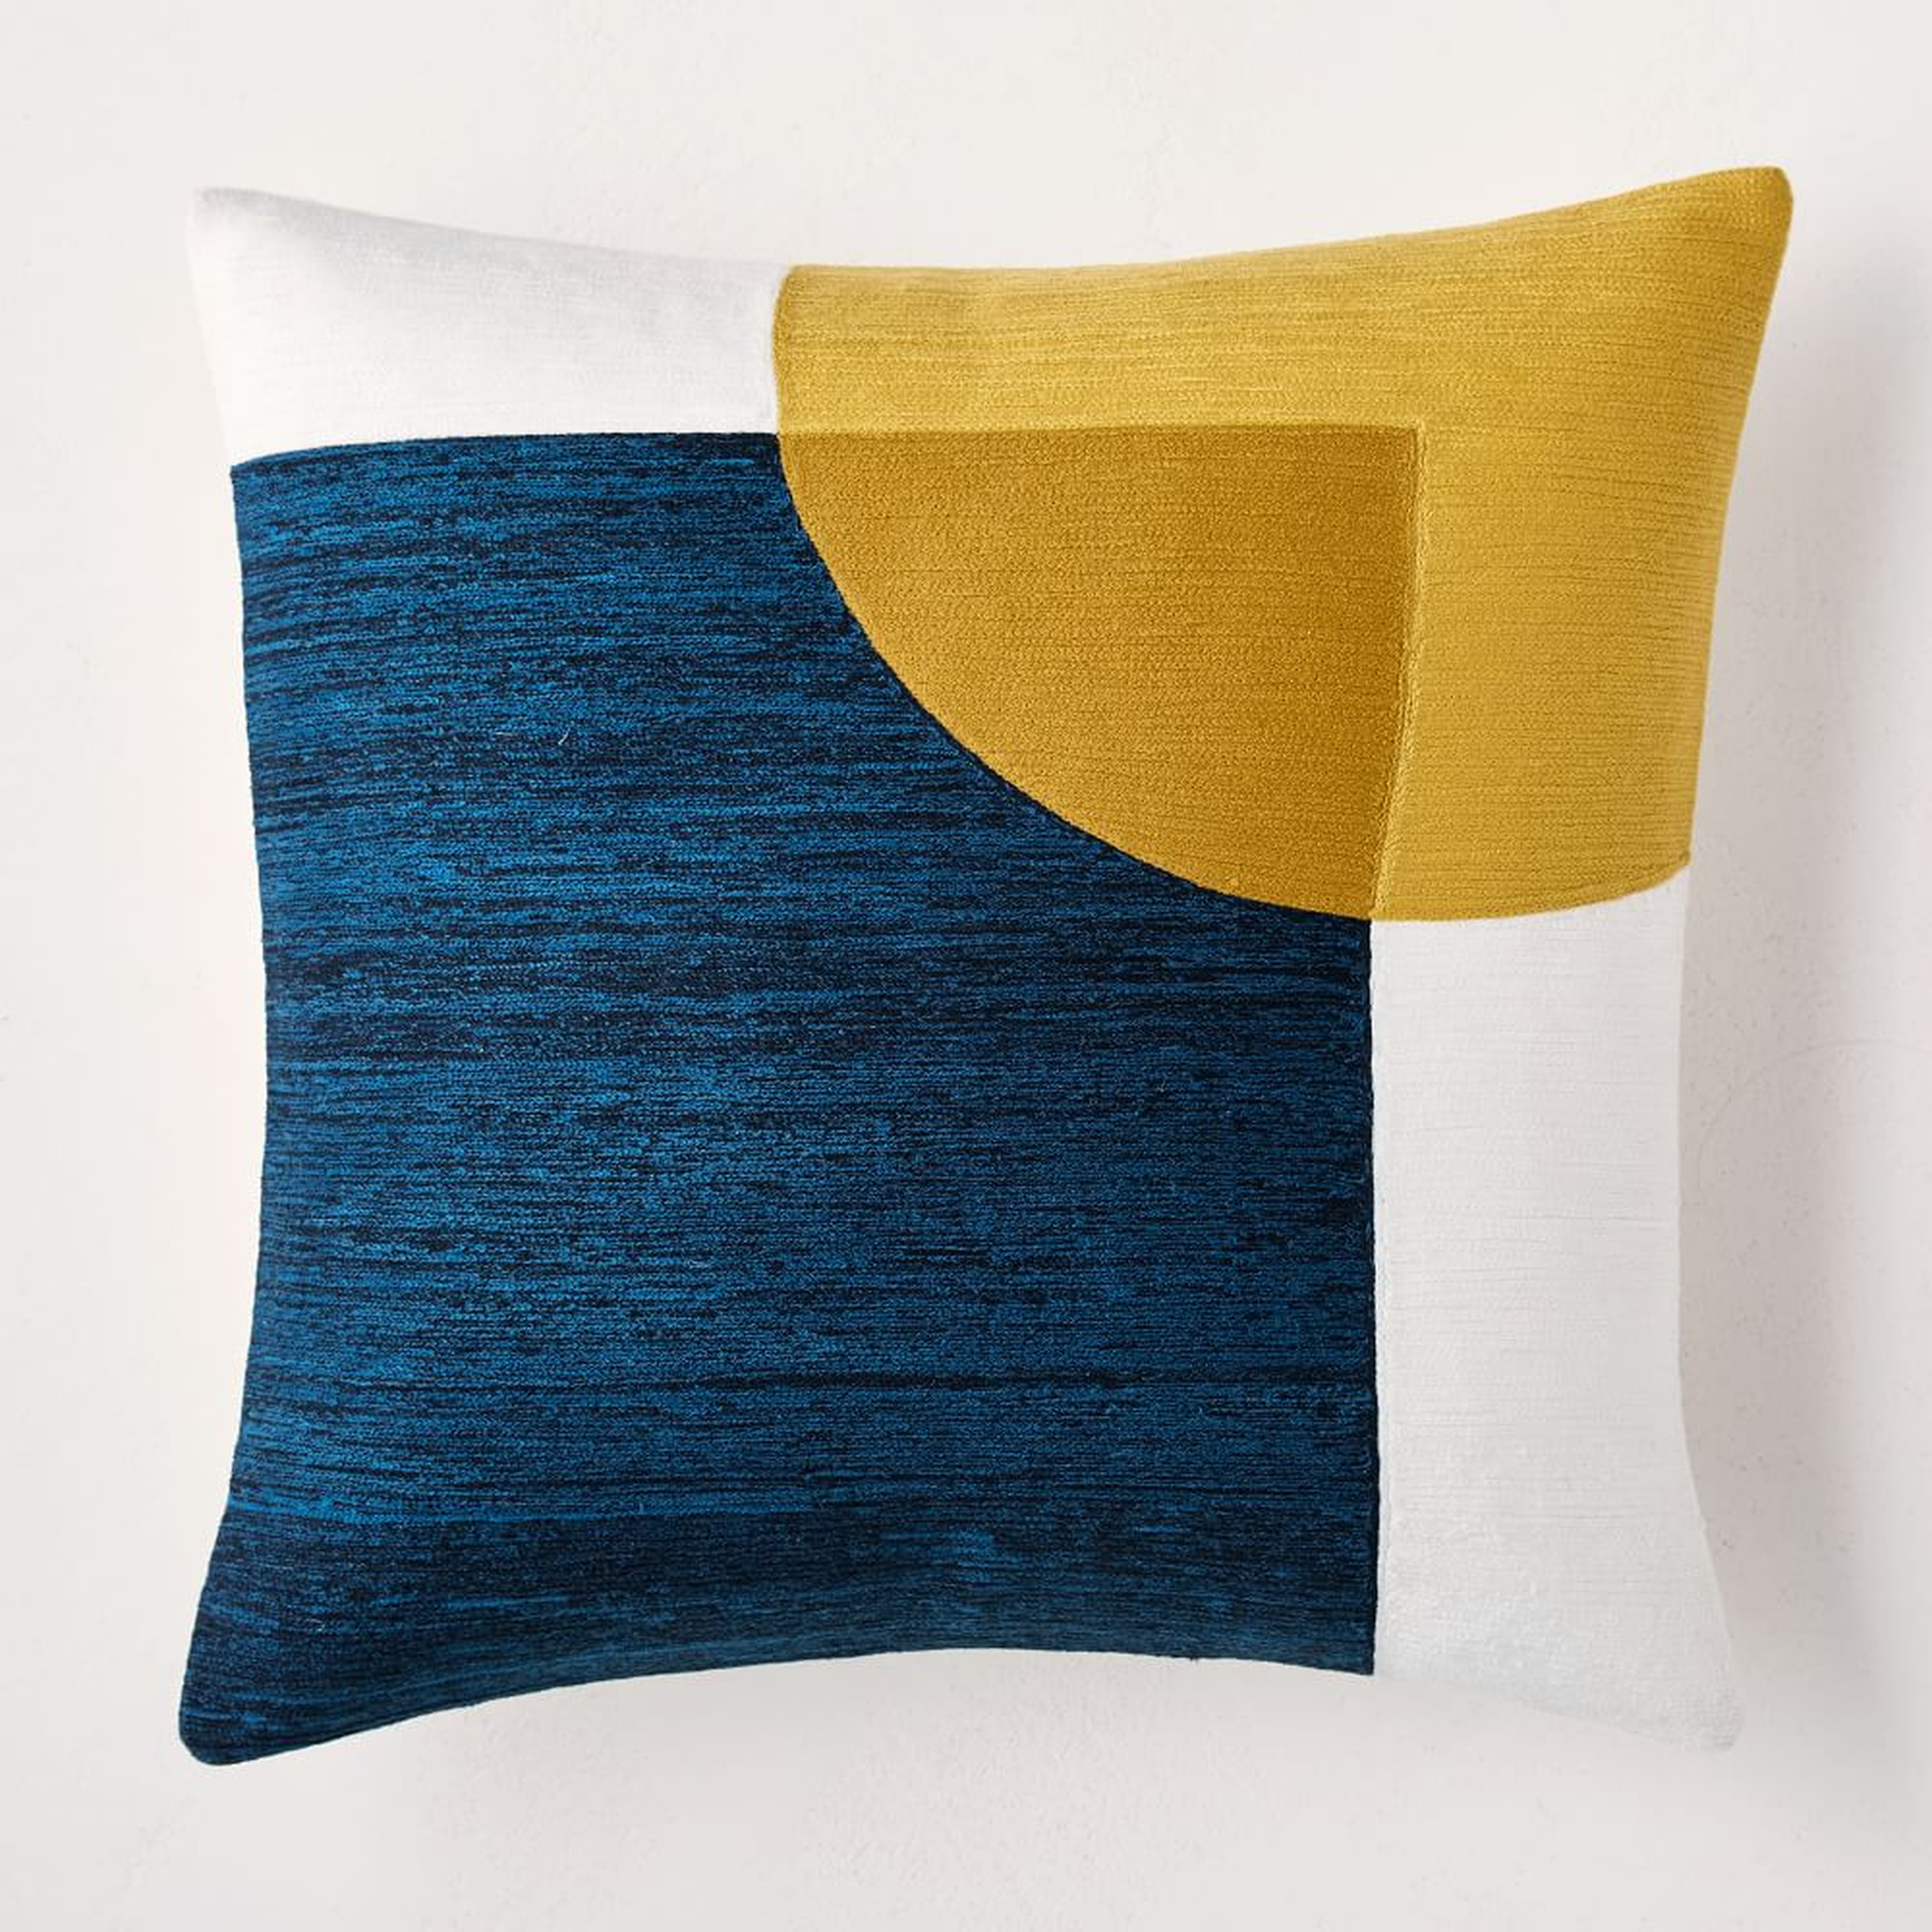 Crewel Overlapping Shapes Pillow Cover, 18"x18", Midnight - West Elm